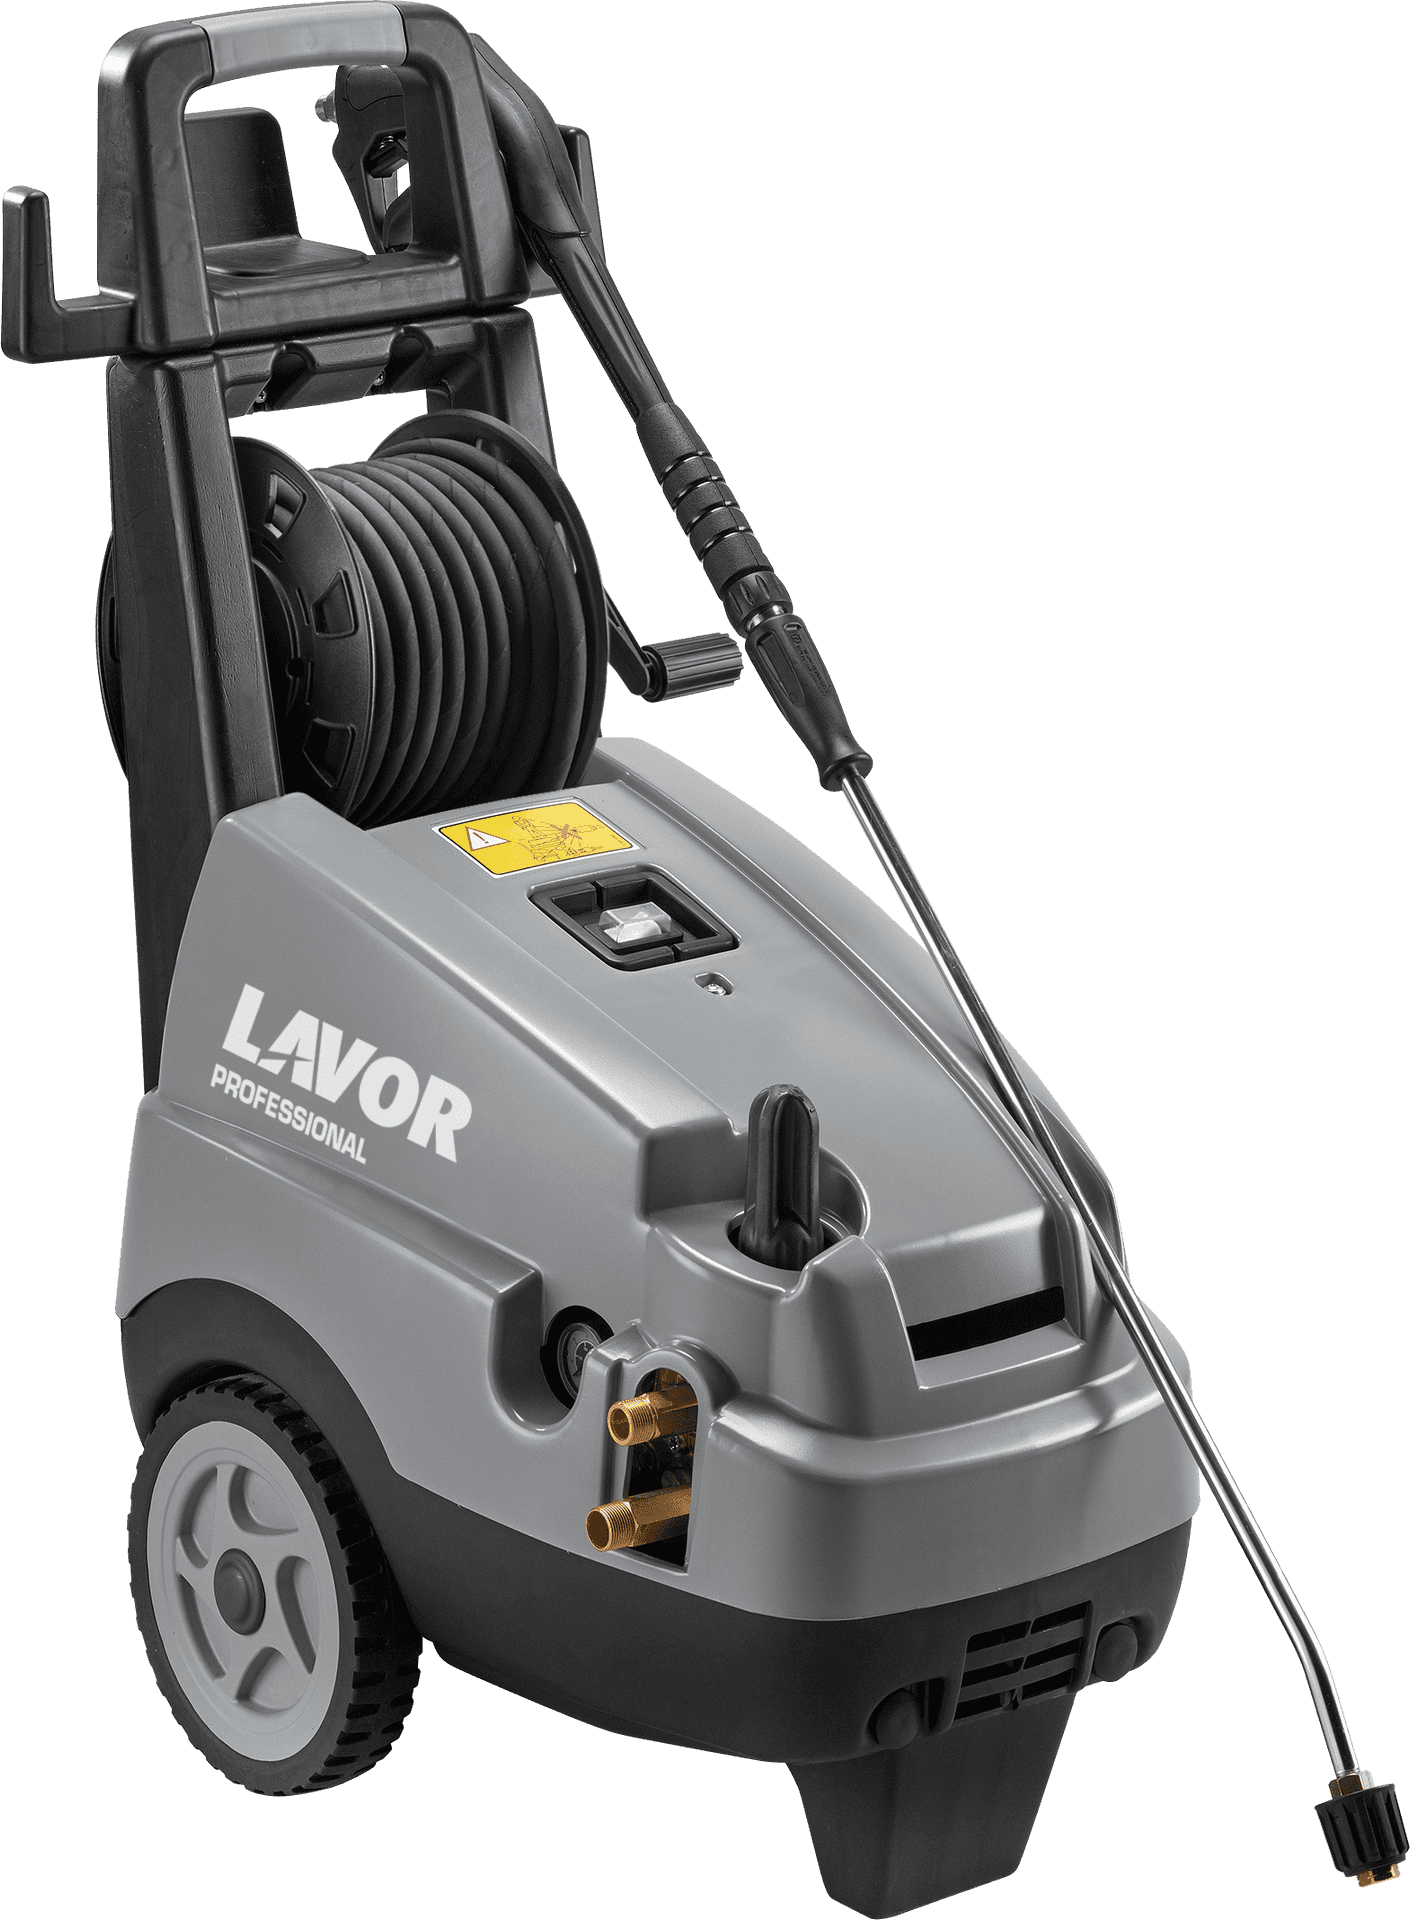 Lavor Professional Pressure Washer PNG